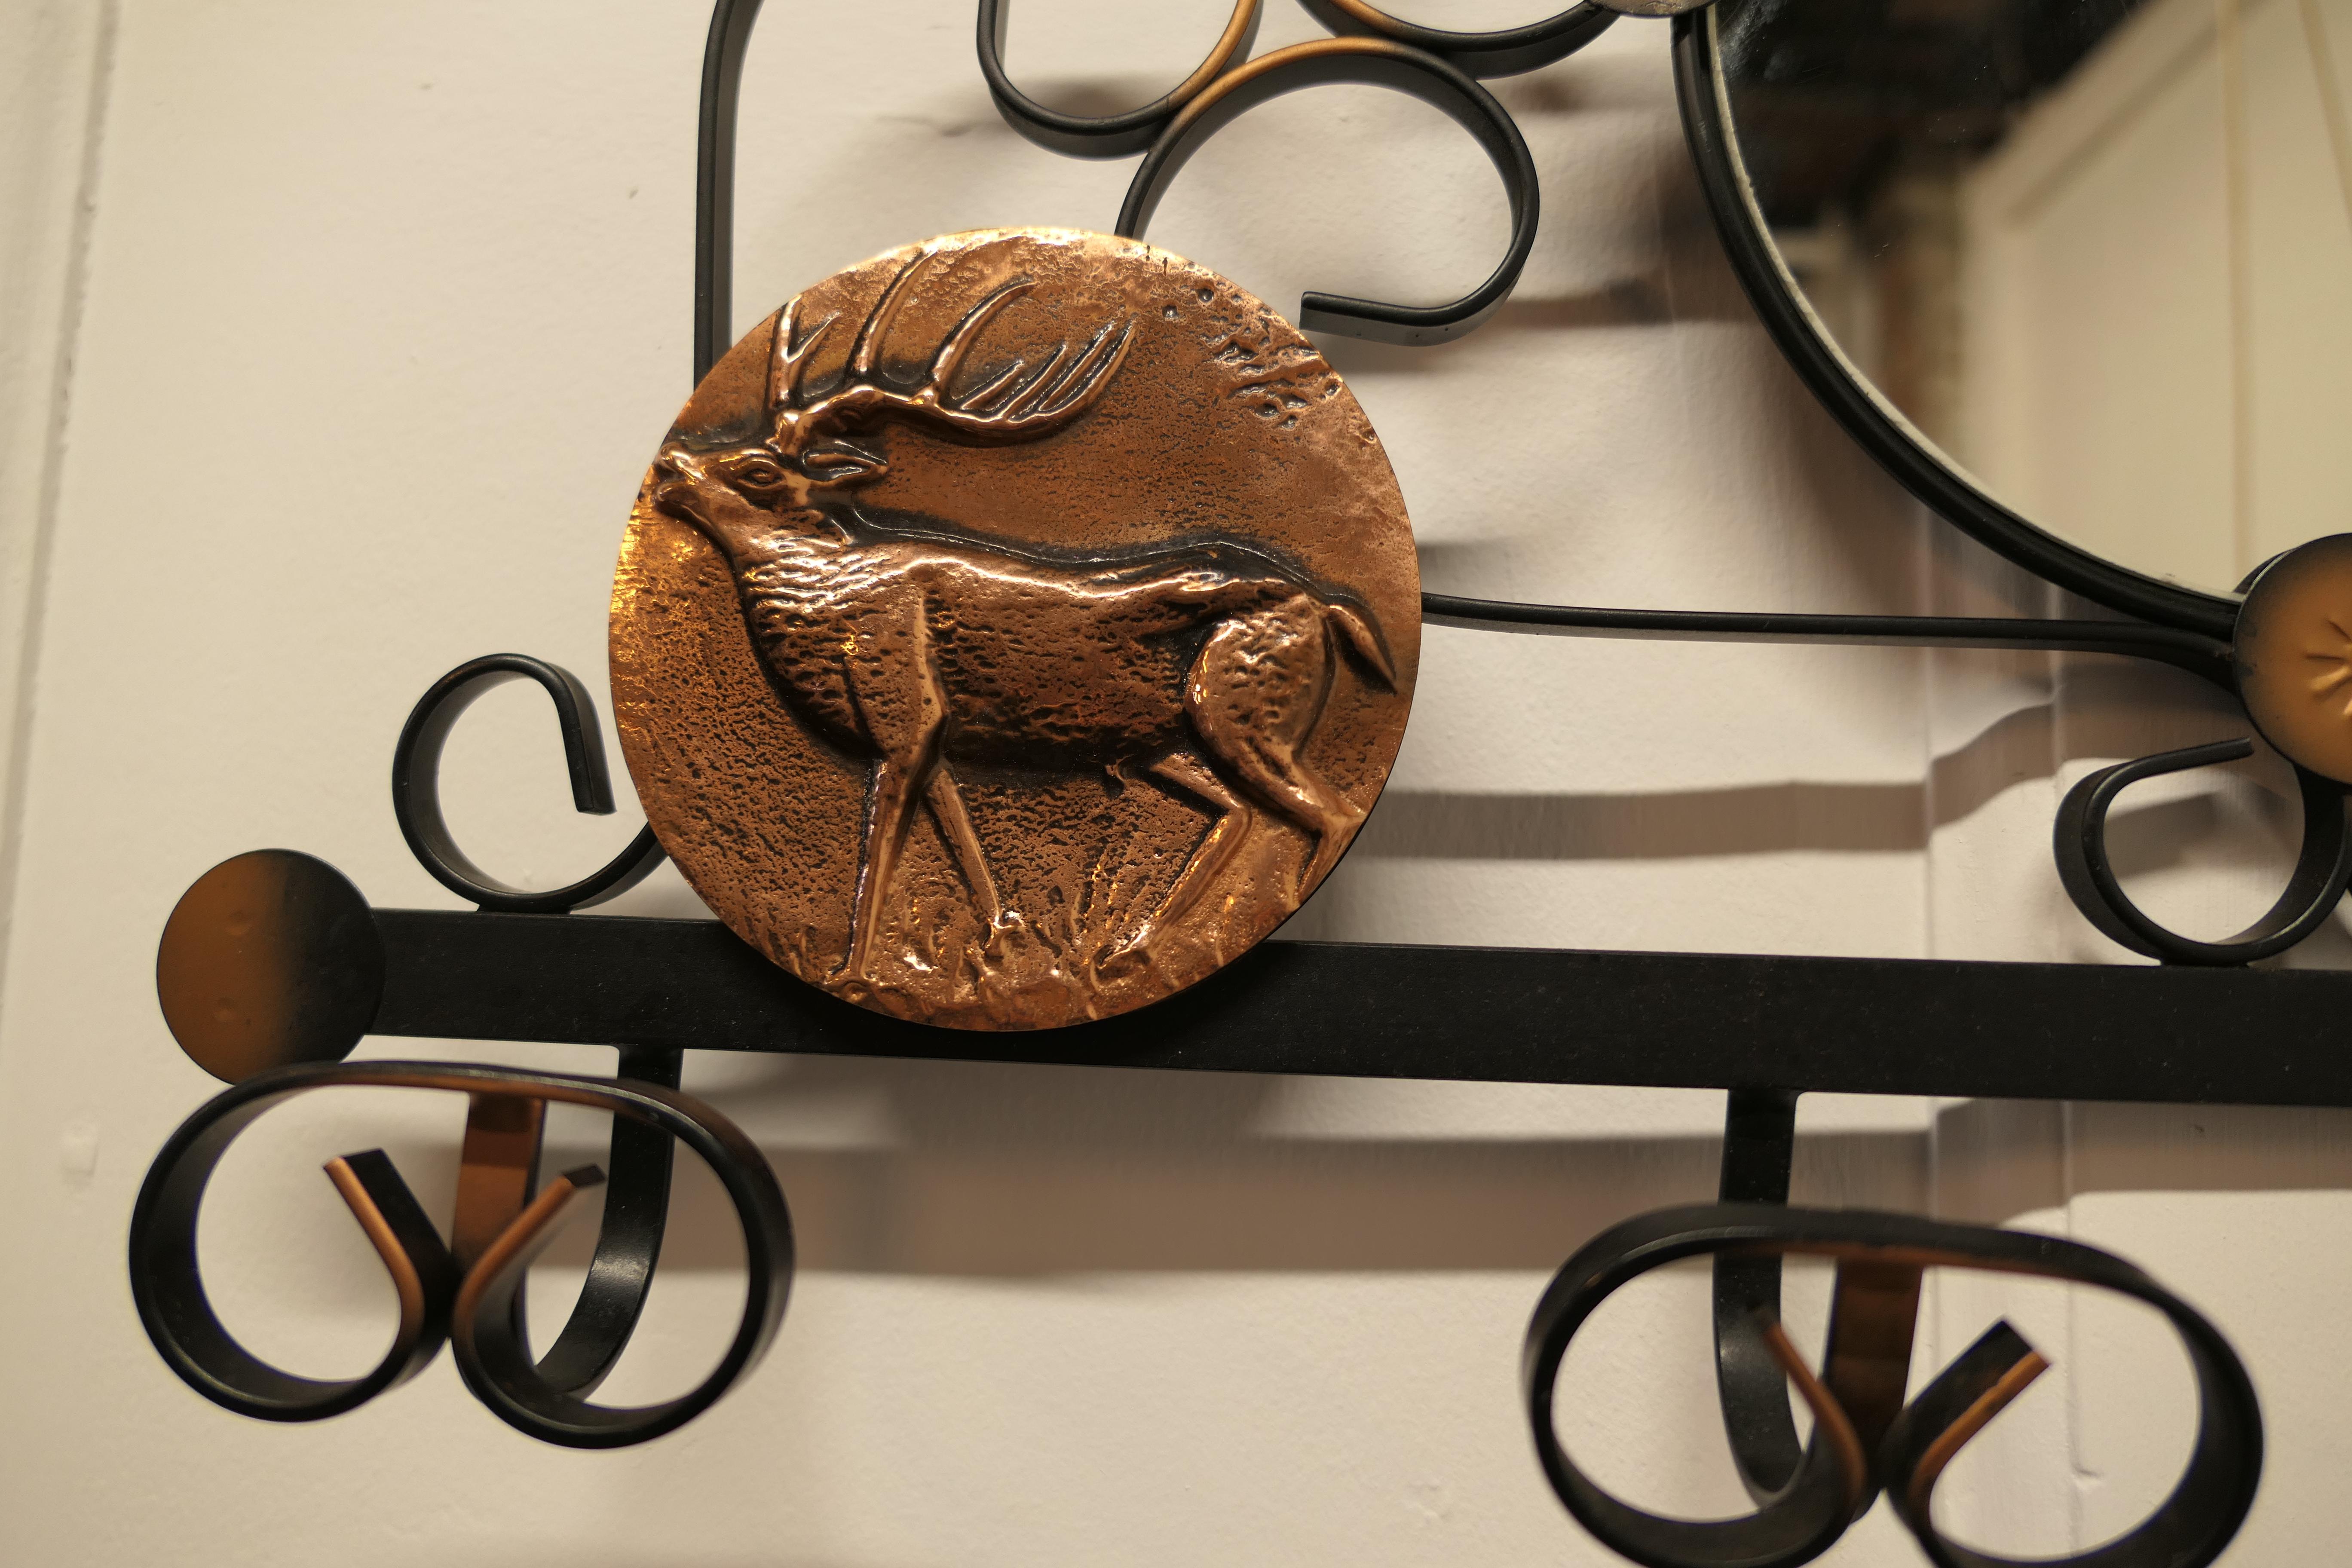 French iron and copper hall coat hooks with mirror.

This is an attractive wall hanging mirror with 4 coat hooks beneath it has 3 decorative beaten copper panels on a Hunting theme with a stag on one and a huntsman taking aim on the other.
The